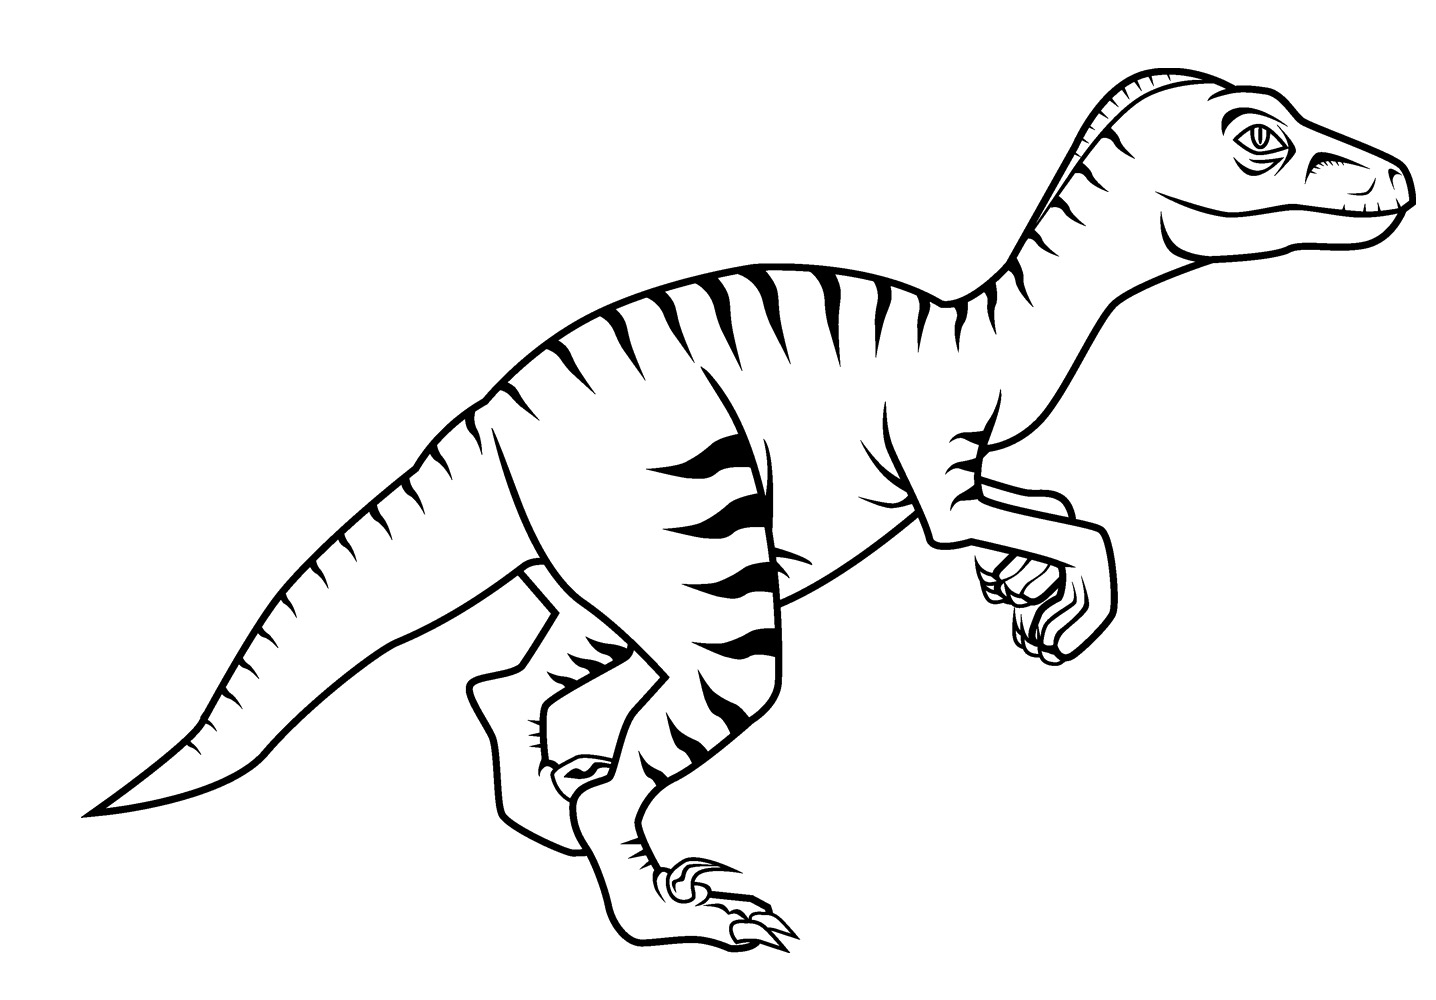 Velociraptor Coloring Pages at GetColorings.com  Free printable